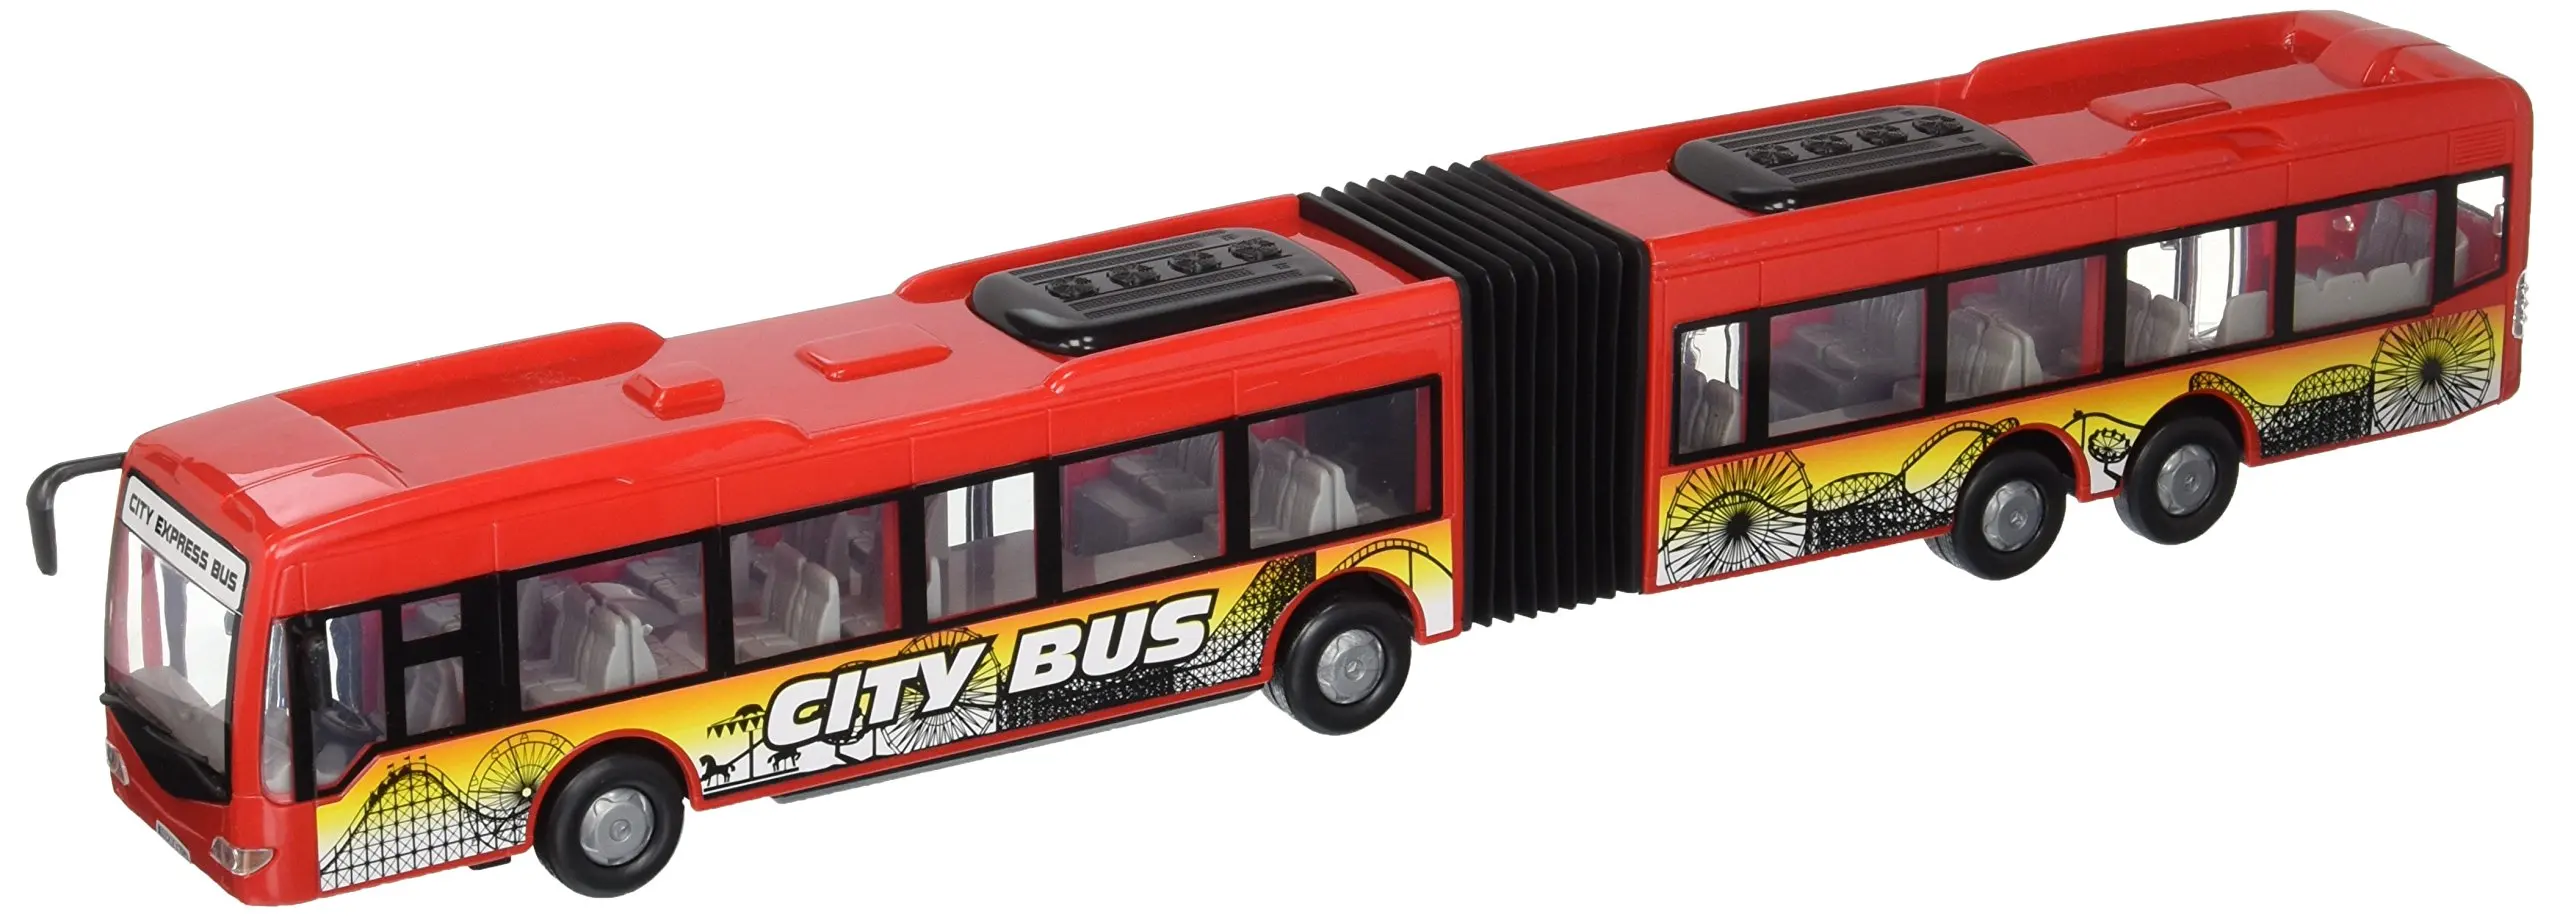 city express bus toy